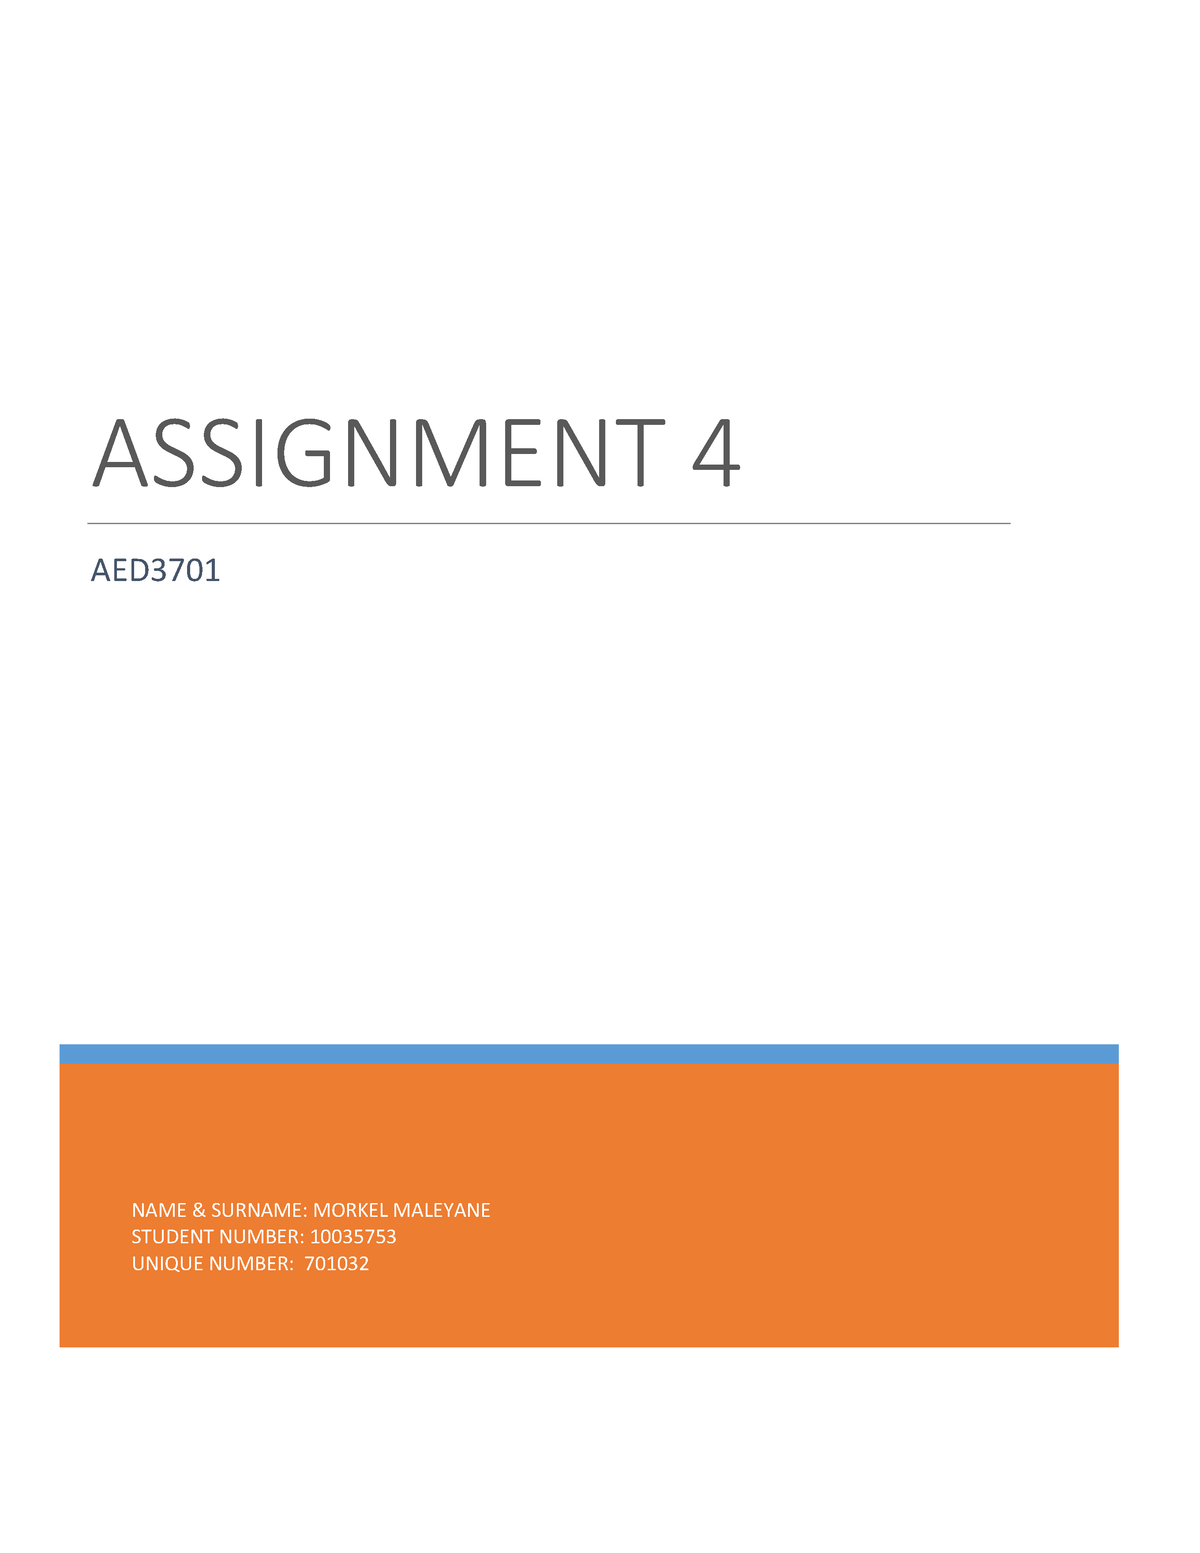 aed3701 assignment 4 answers